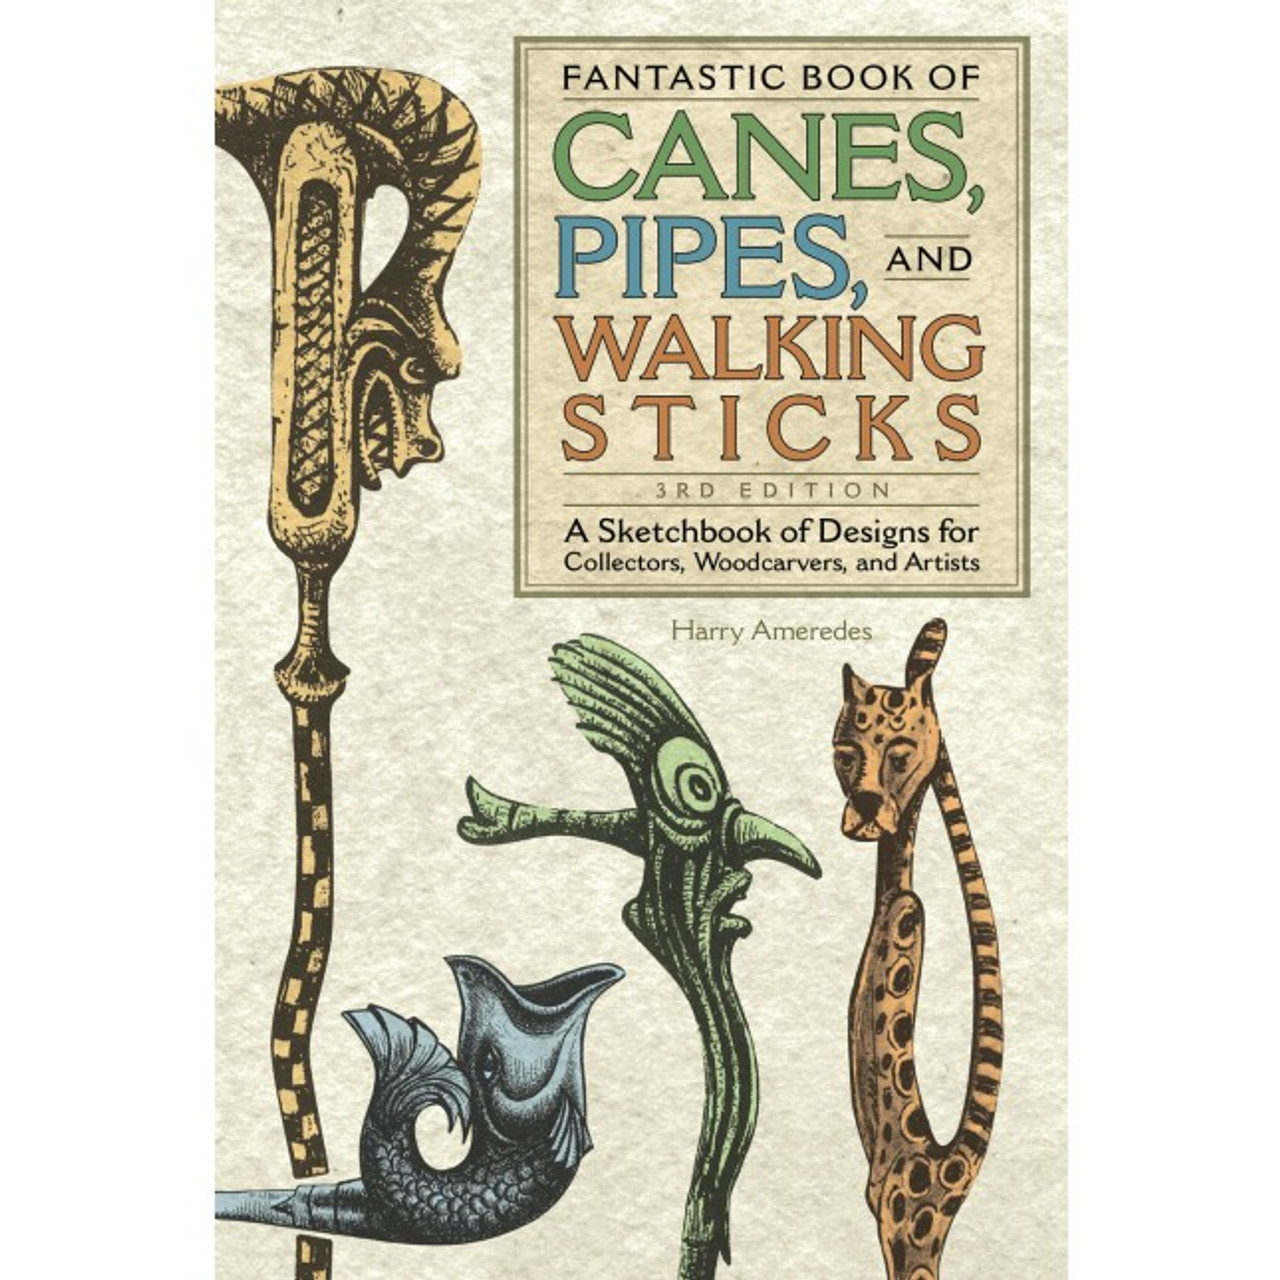 https://cdn11.bigcommerce.com/s-jhzpn4wnp8/images/stencil/1280x1280/products/11727/17402/Fantastic_Book_Of_Canes_Pipes_Walking_Sticks__06851__11094.1681000895.jpg?c=2